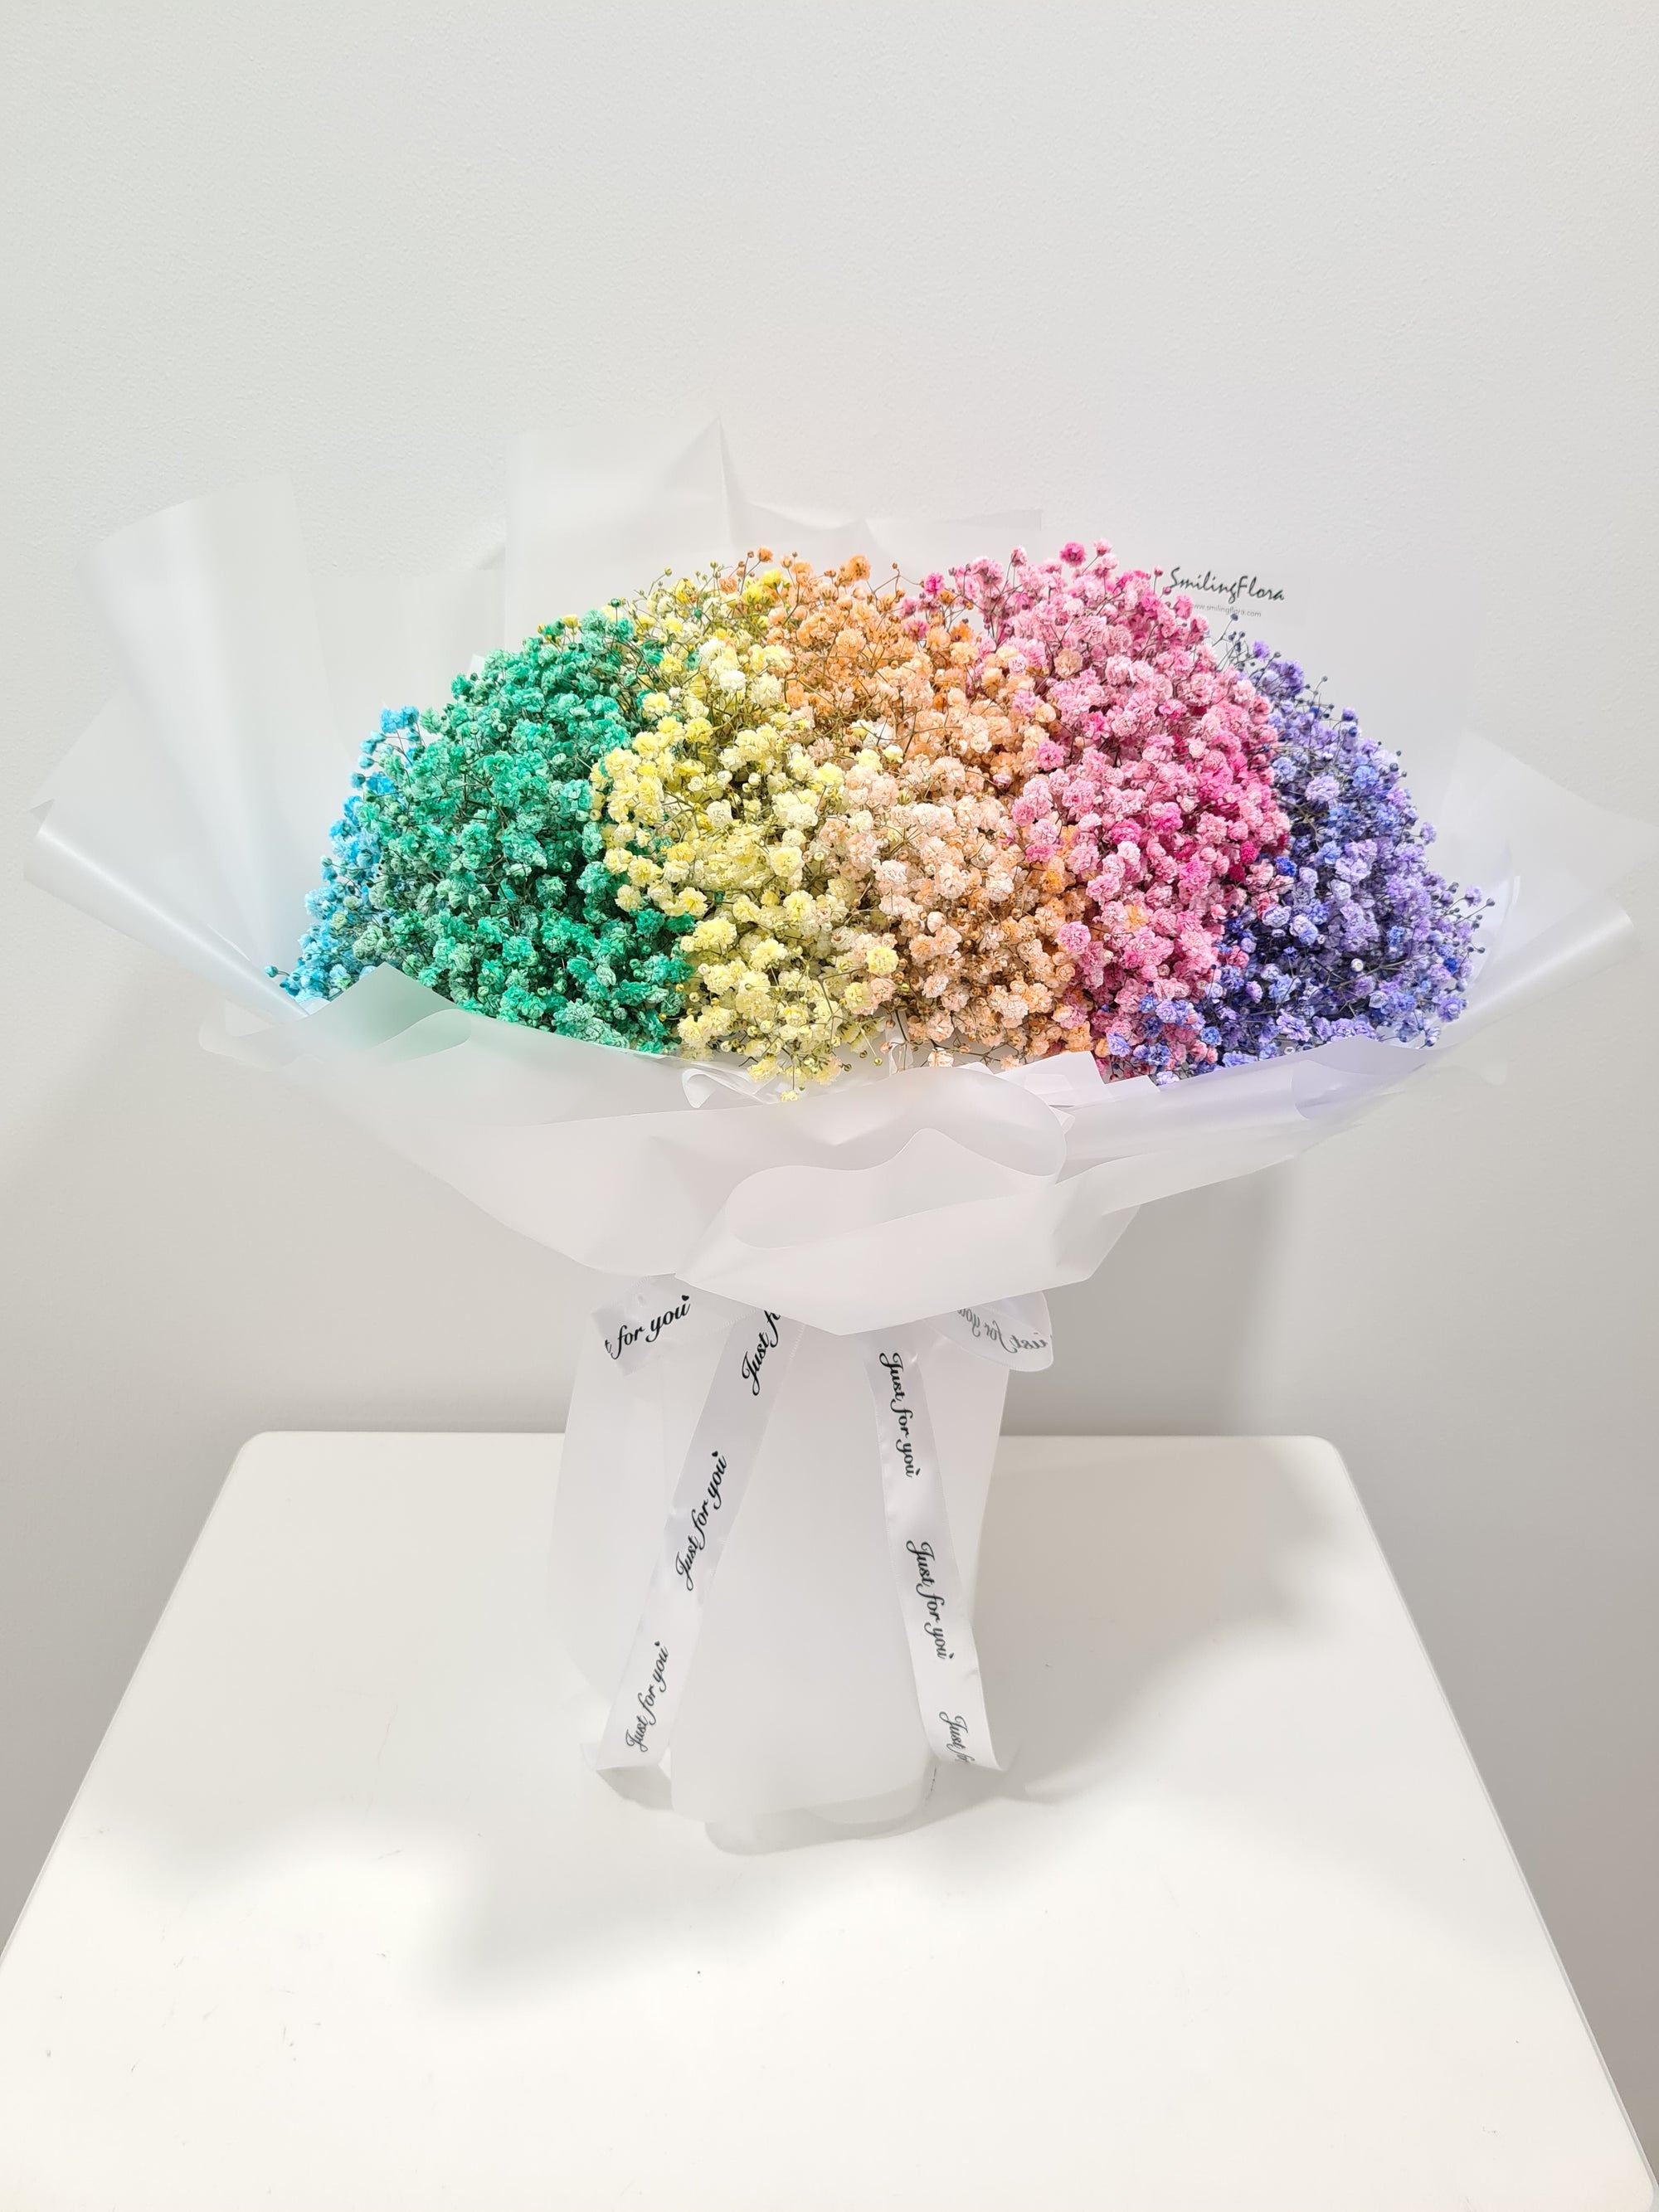 Big Baby Breath Bouquet (Available in other Colours)